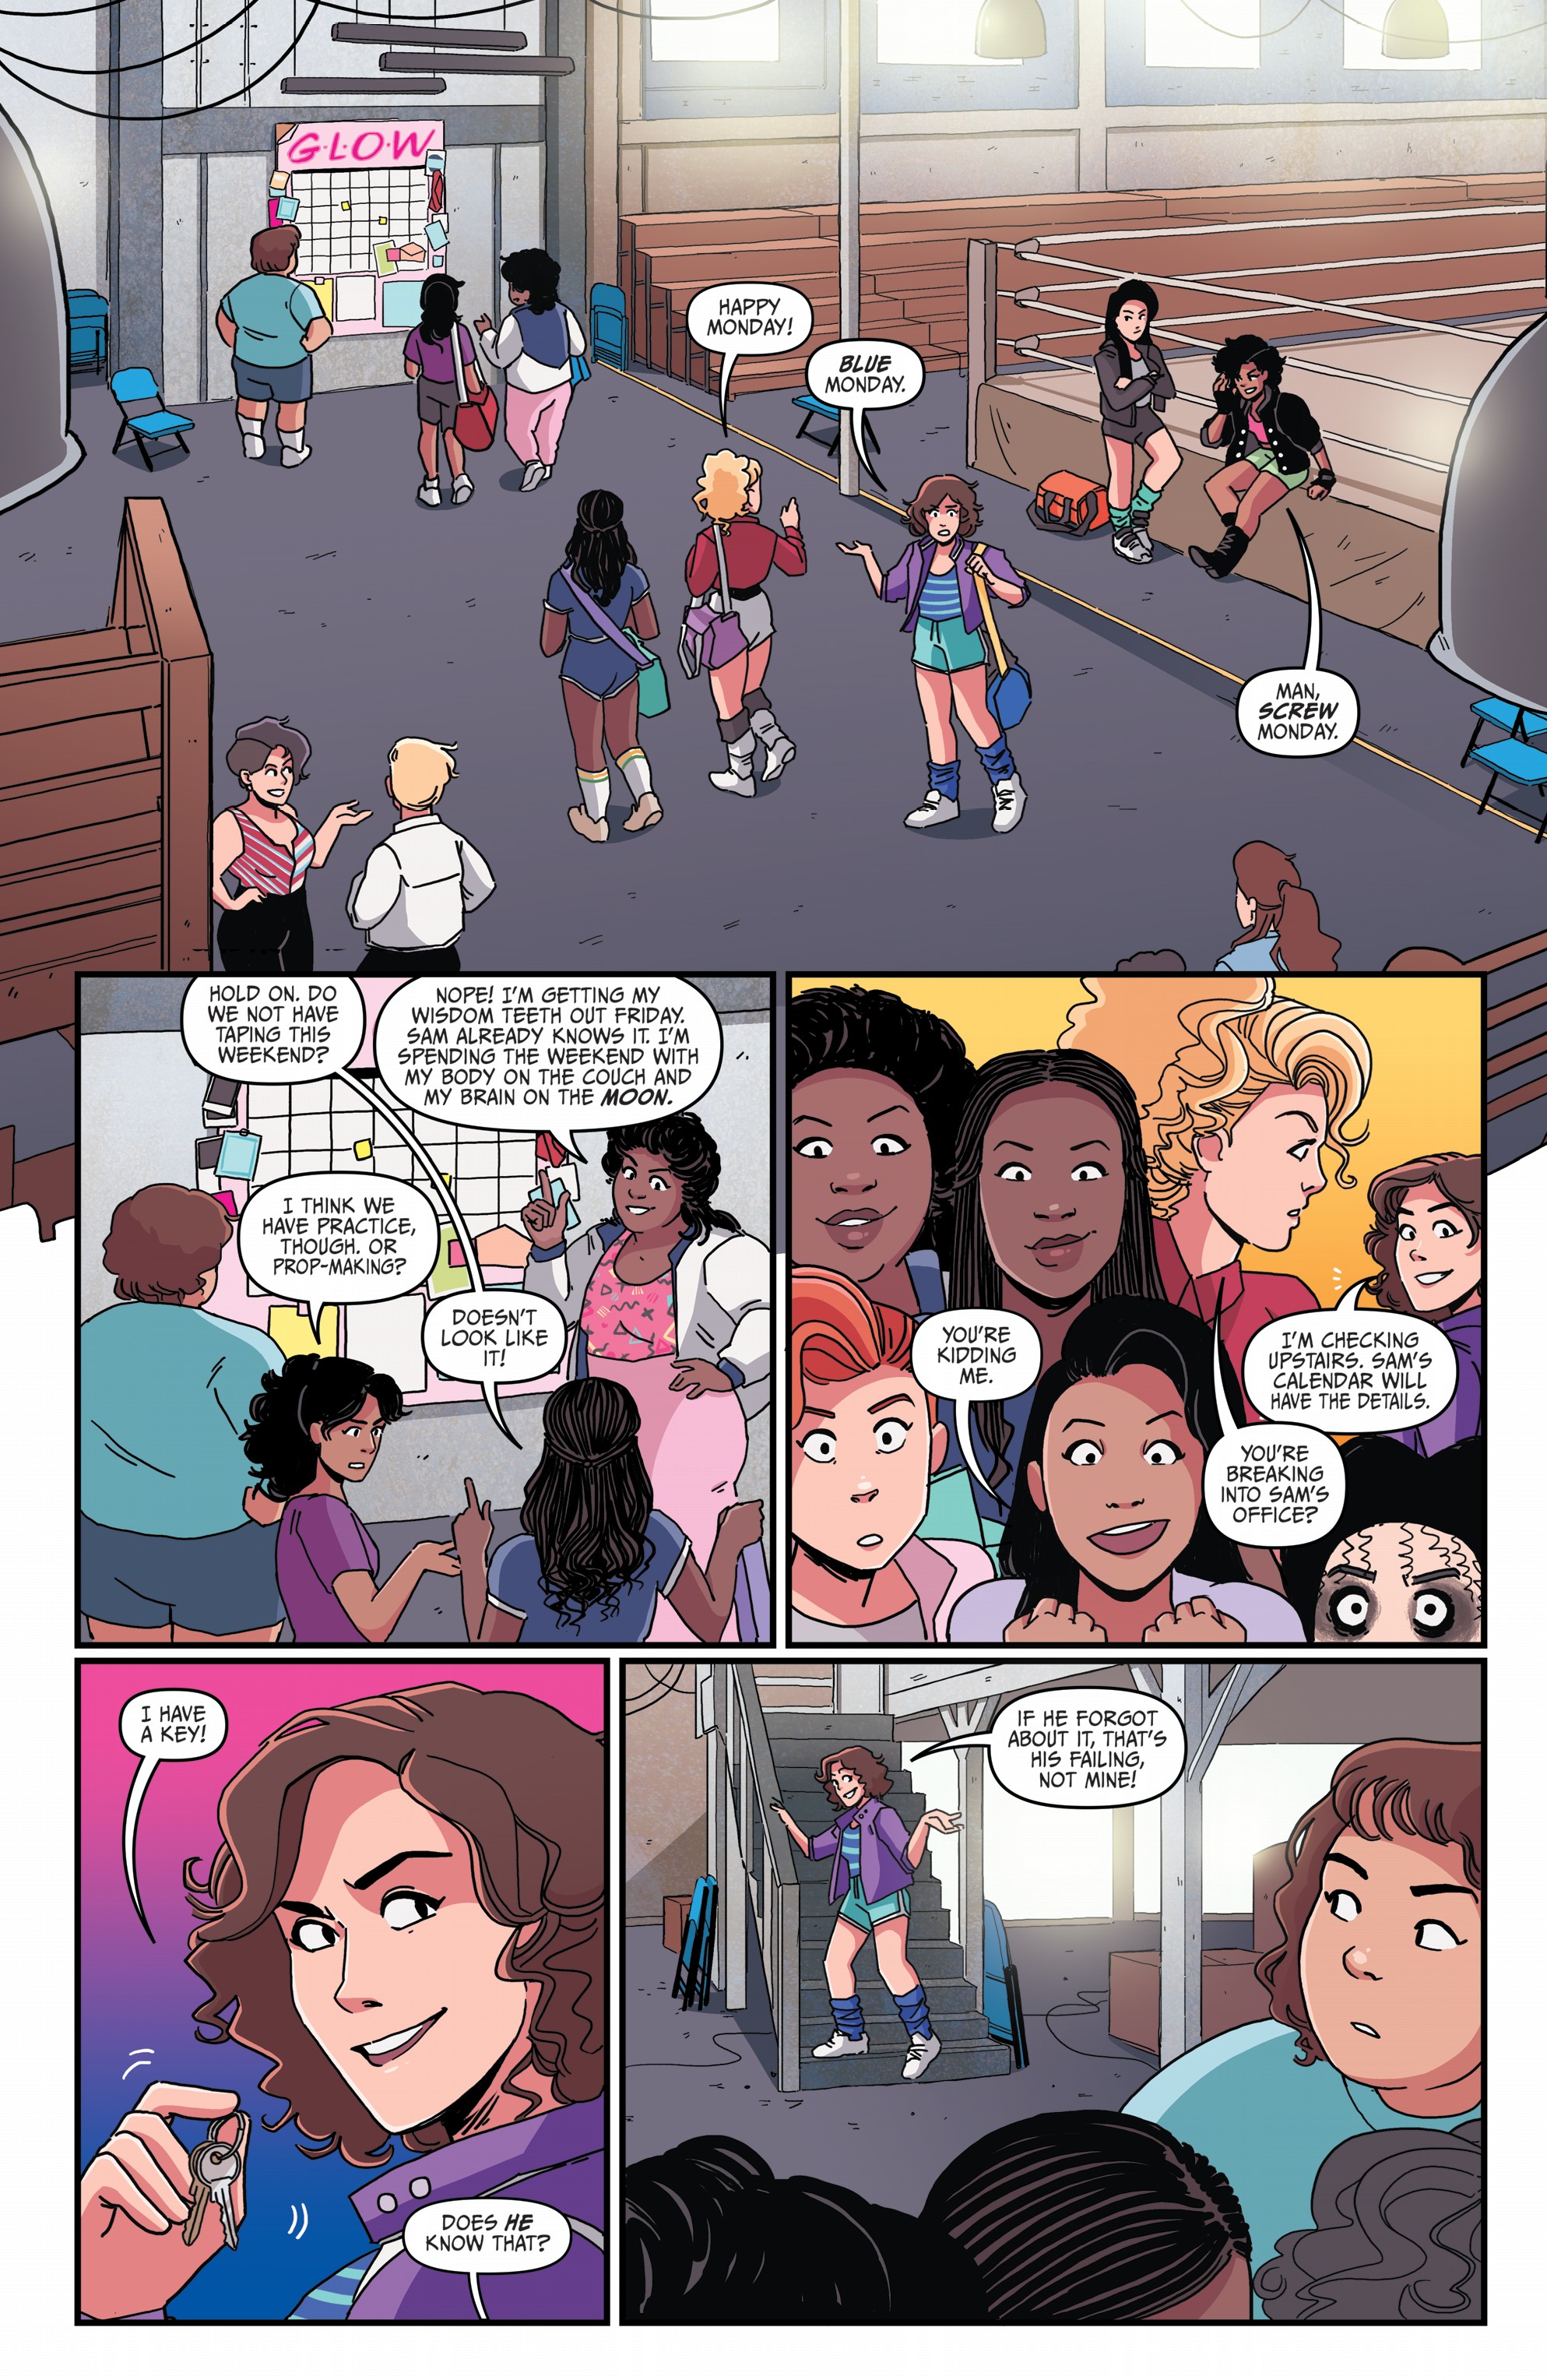 GLOW (2019-): Chapter 1 - Page 3